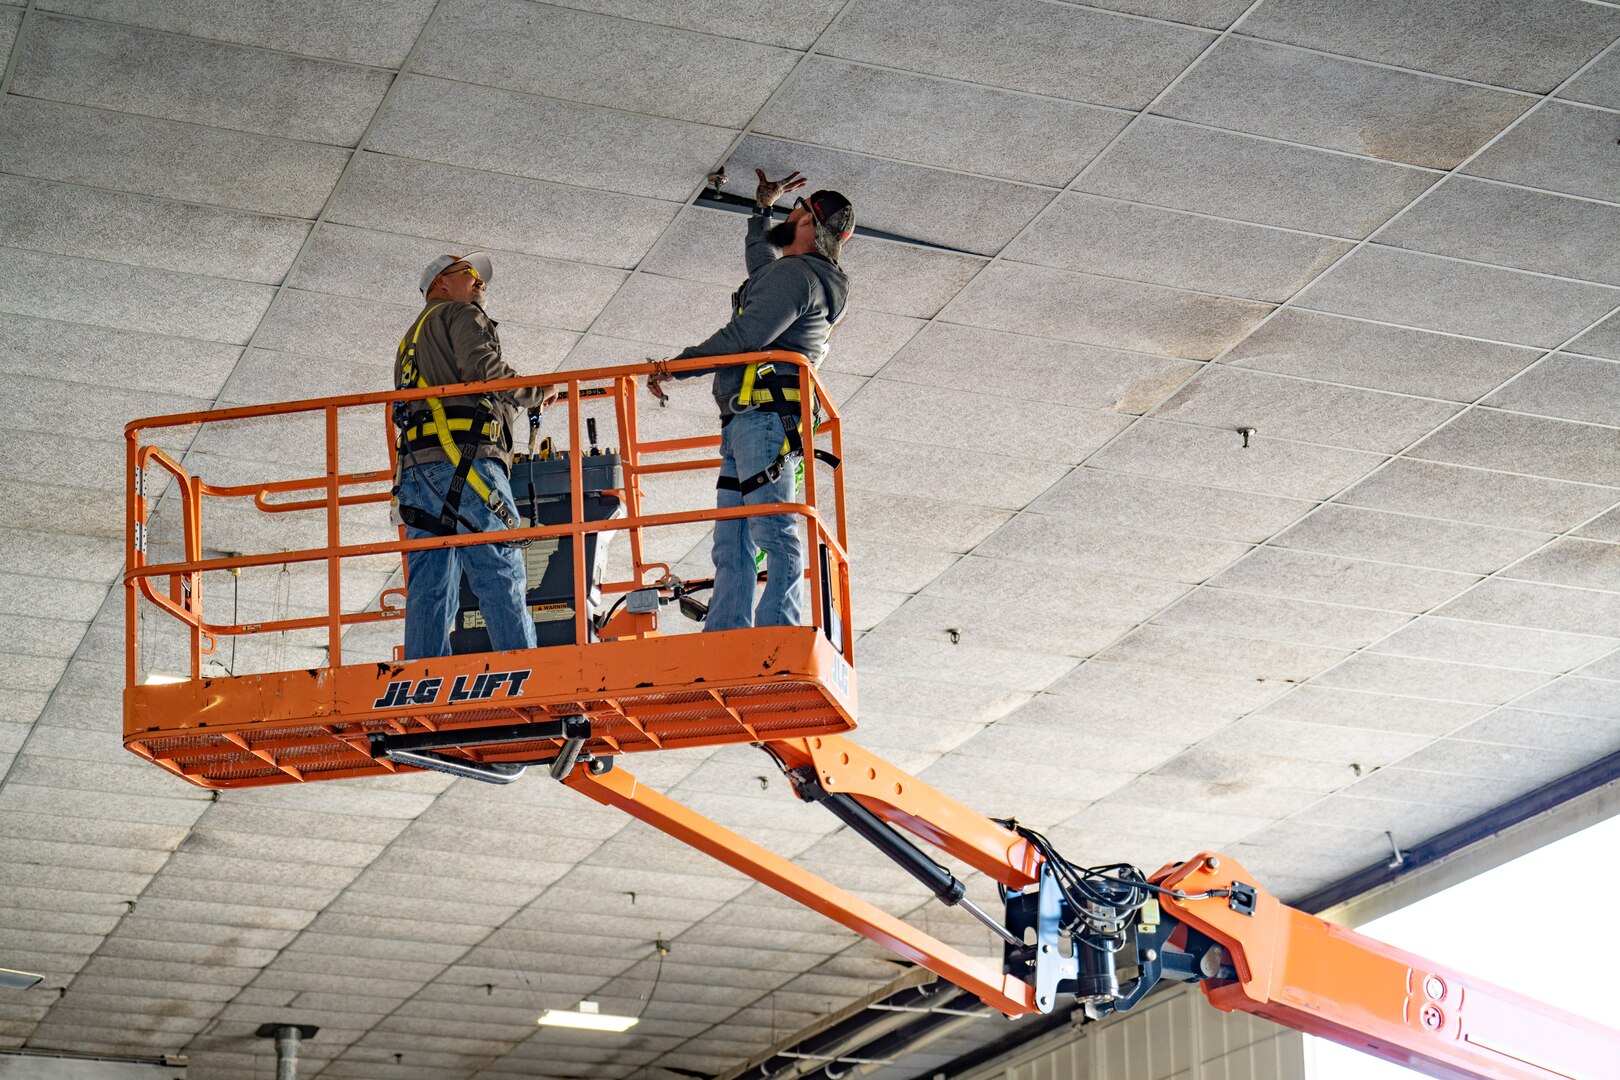 Two male workers on crane in aircraft hanger